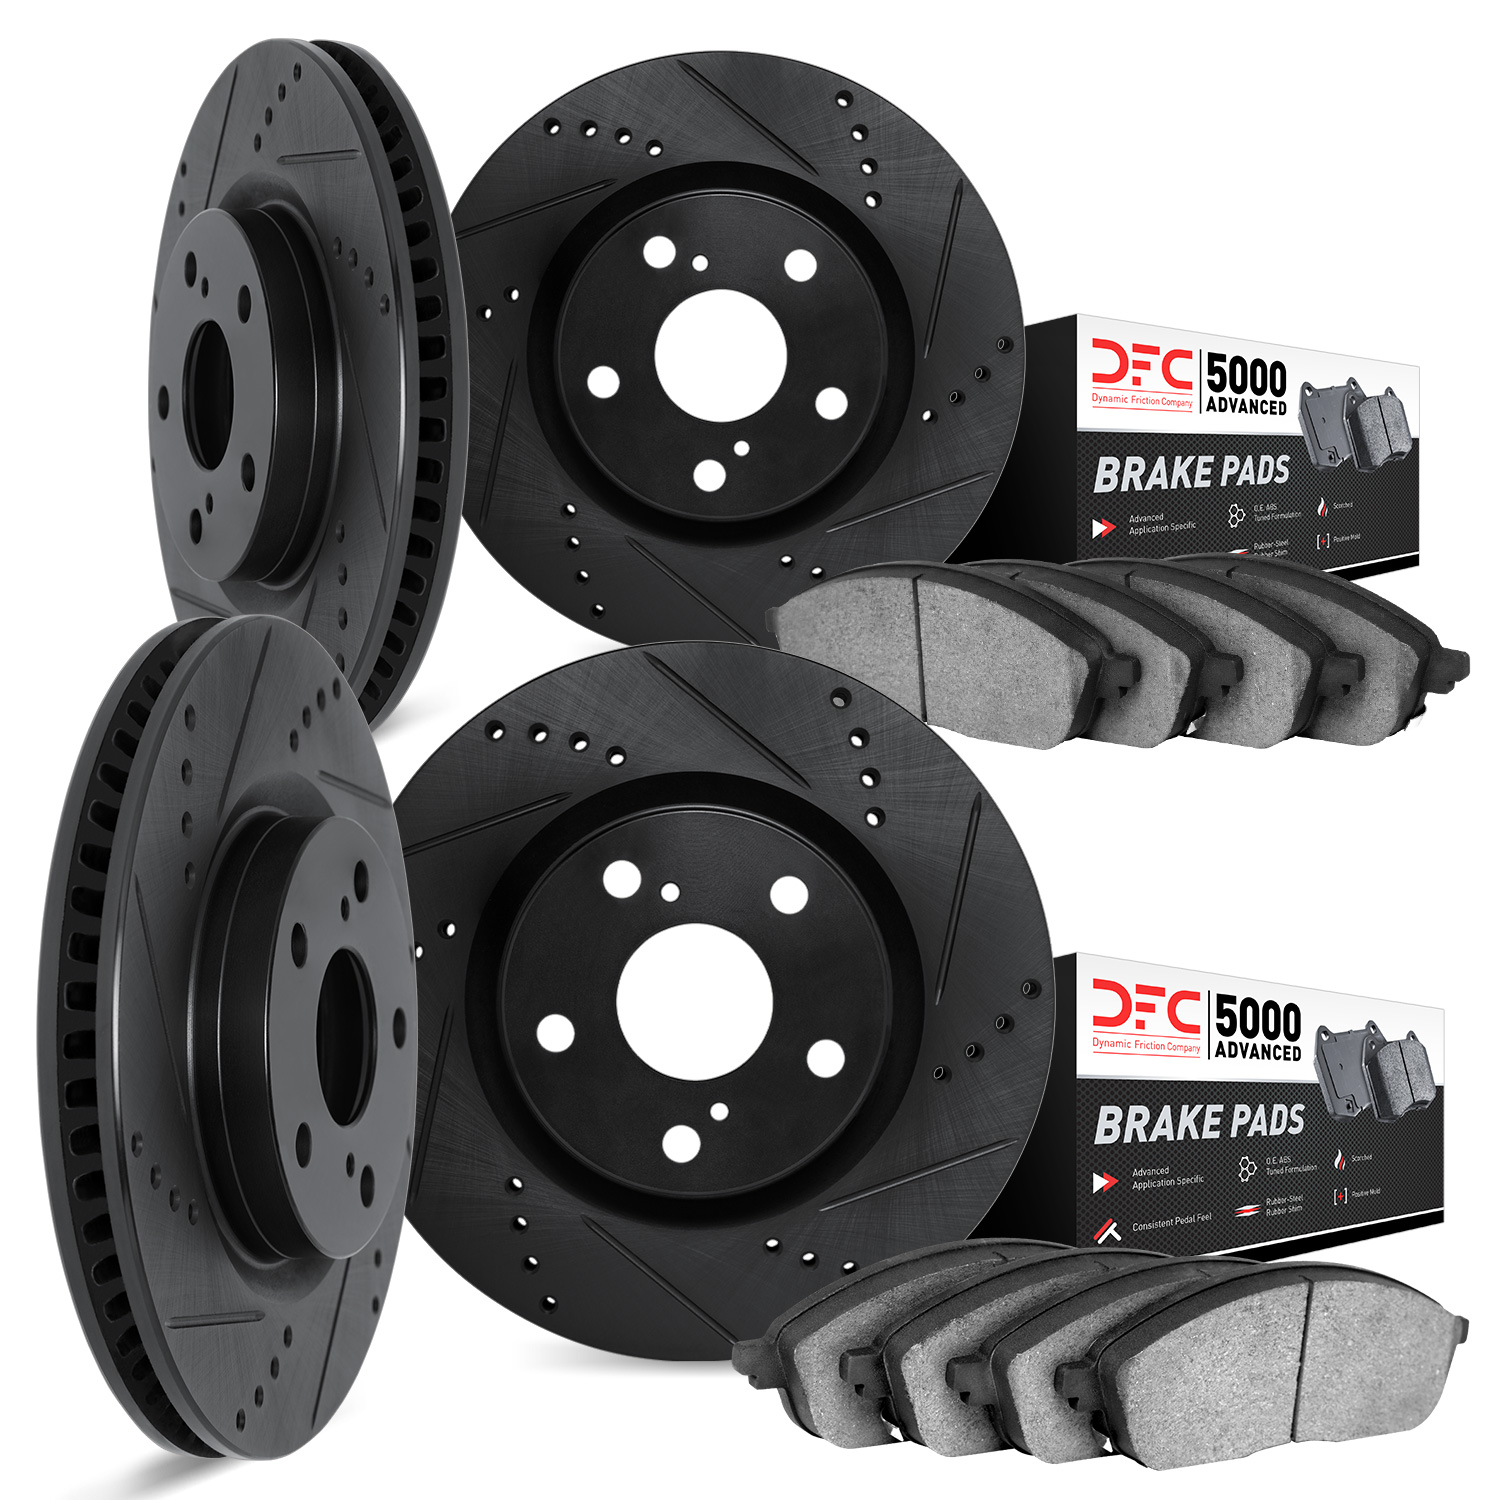 8504-31070 Drilled/Slotted Brake Rotors w/5000 Advanced Brake Pads Kit [Black], 2014-2019 BMW, Position: Front and Rear